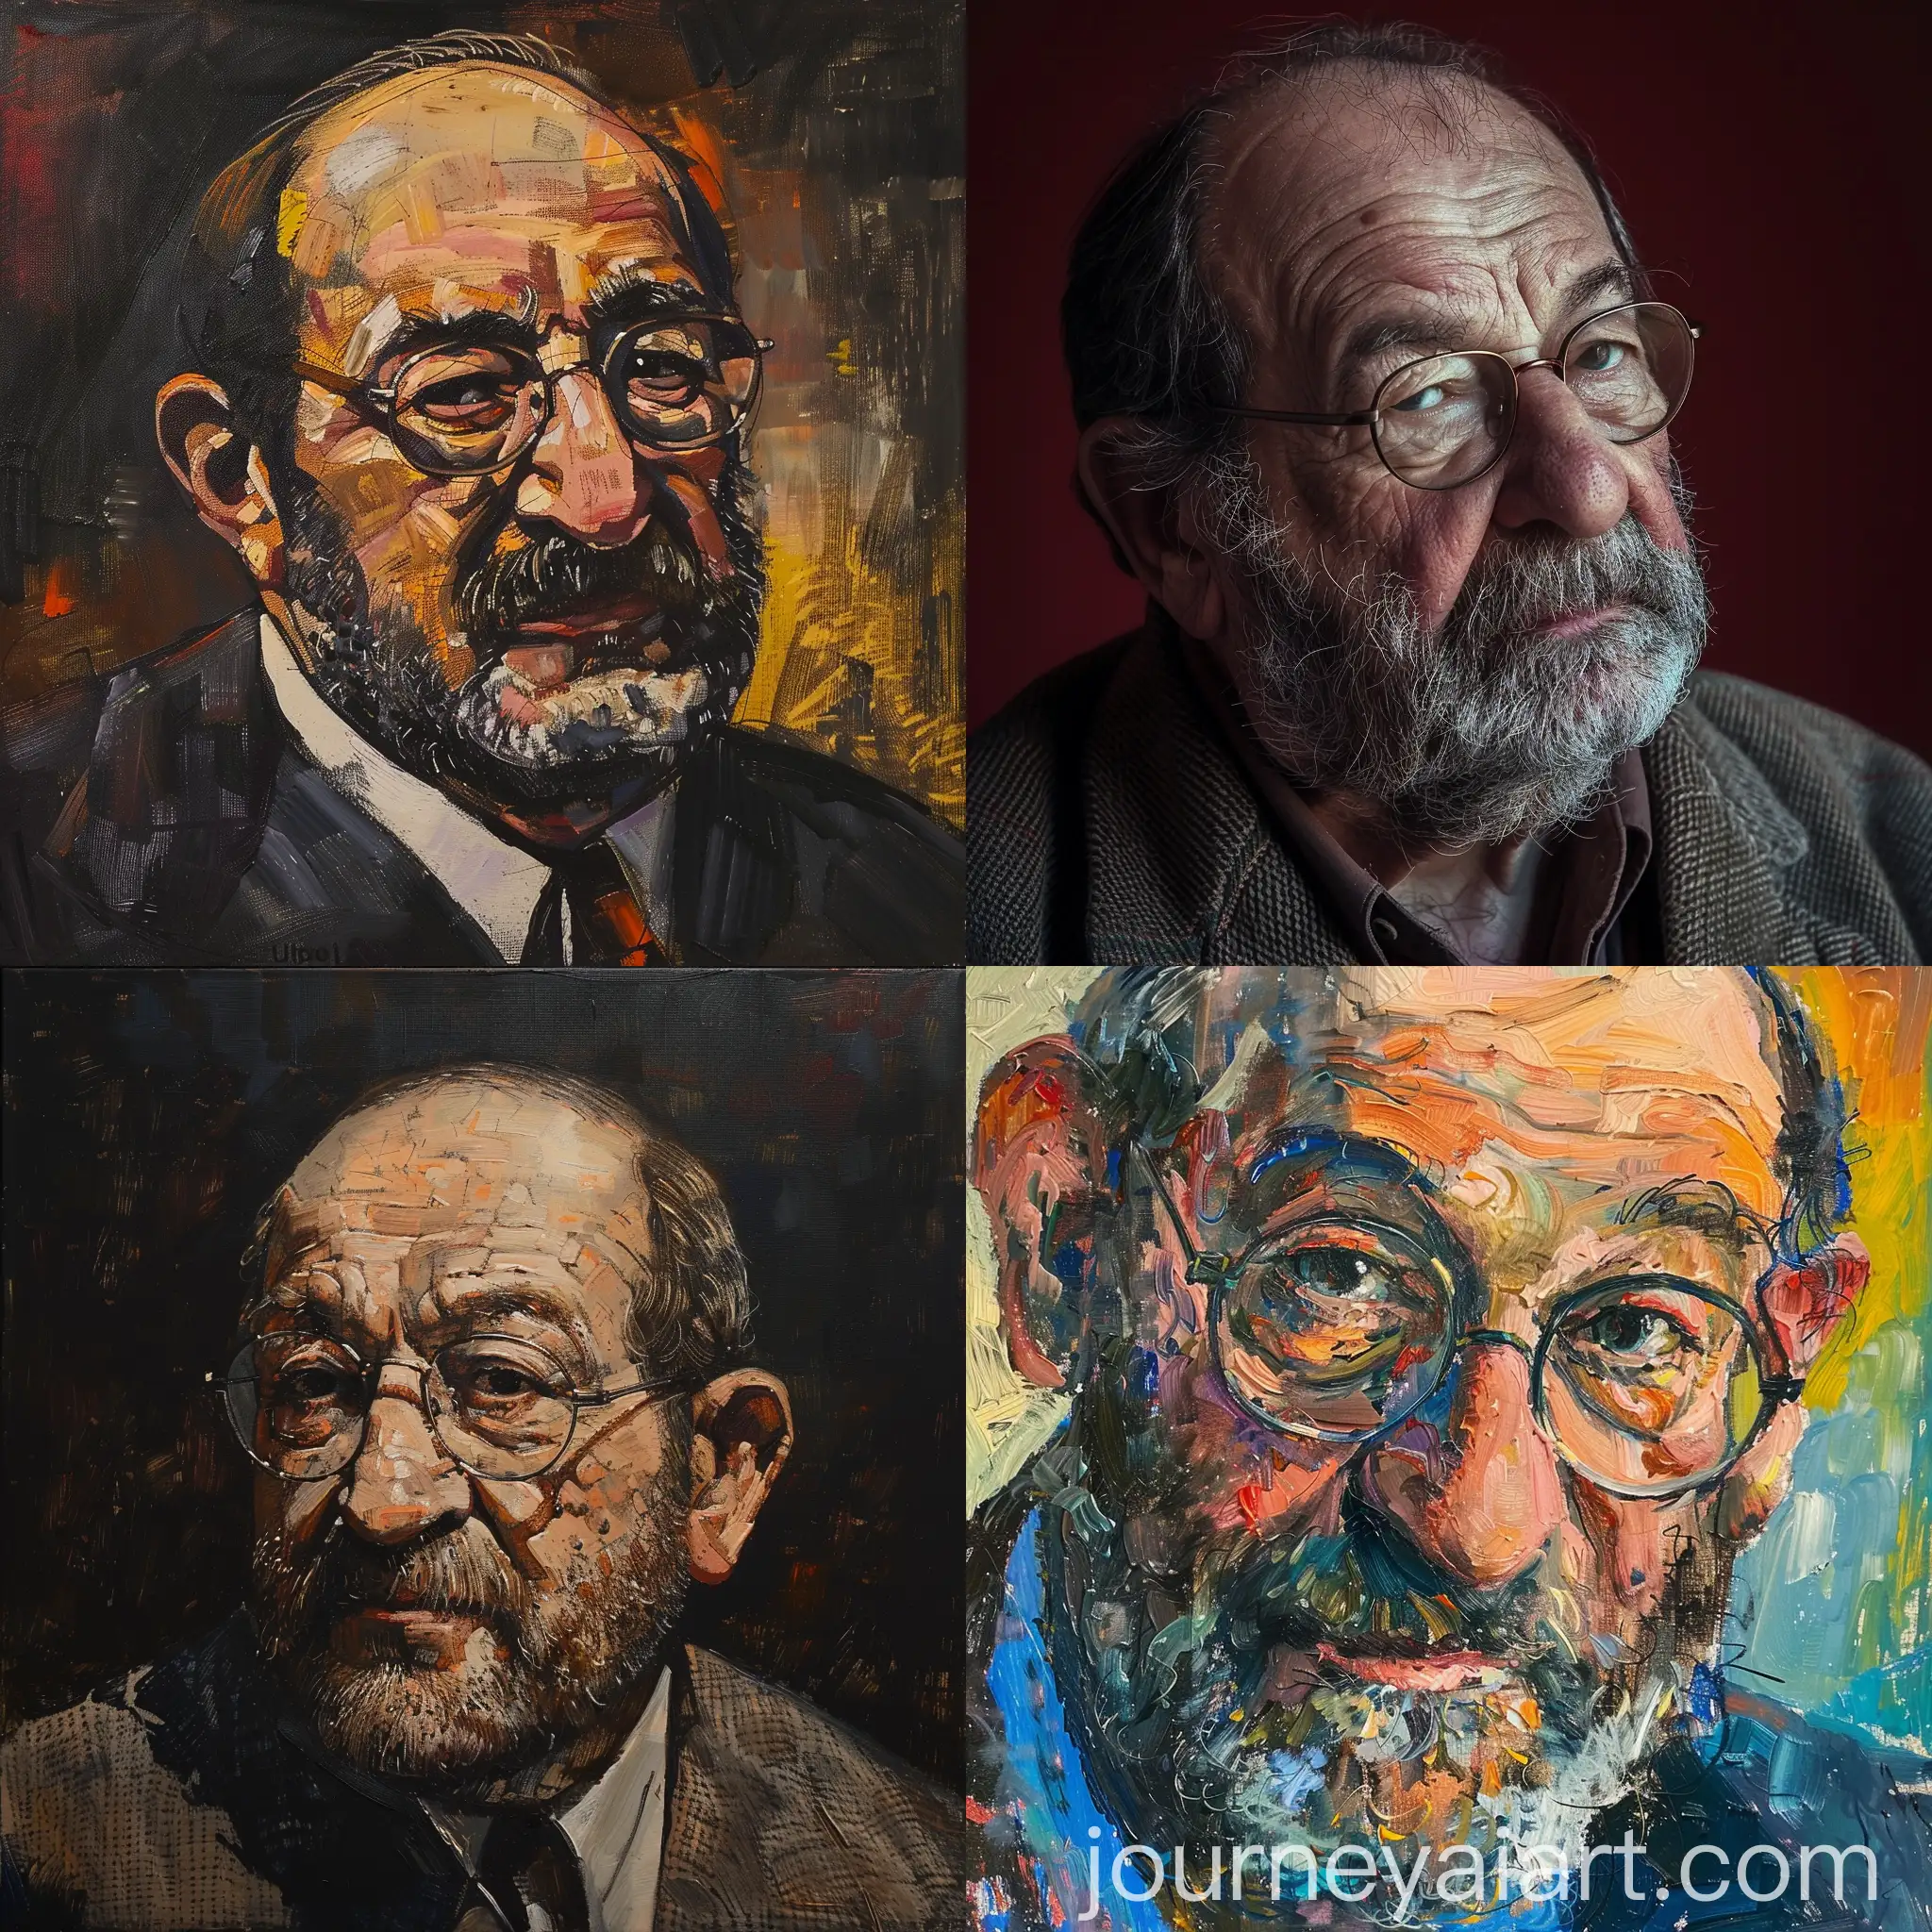 Umberto-Eco-Tone-Artwork-with-Vibrant-Colors-and-Abstract-Patterns